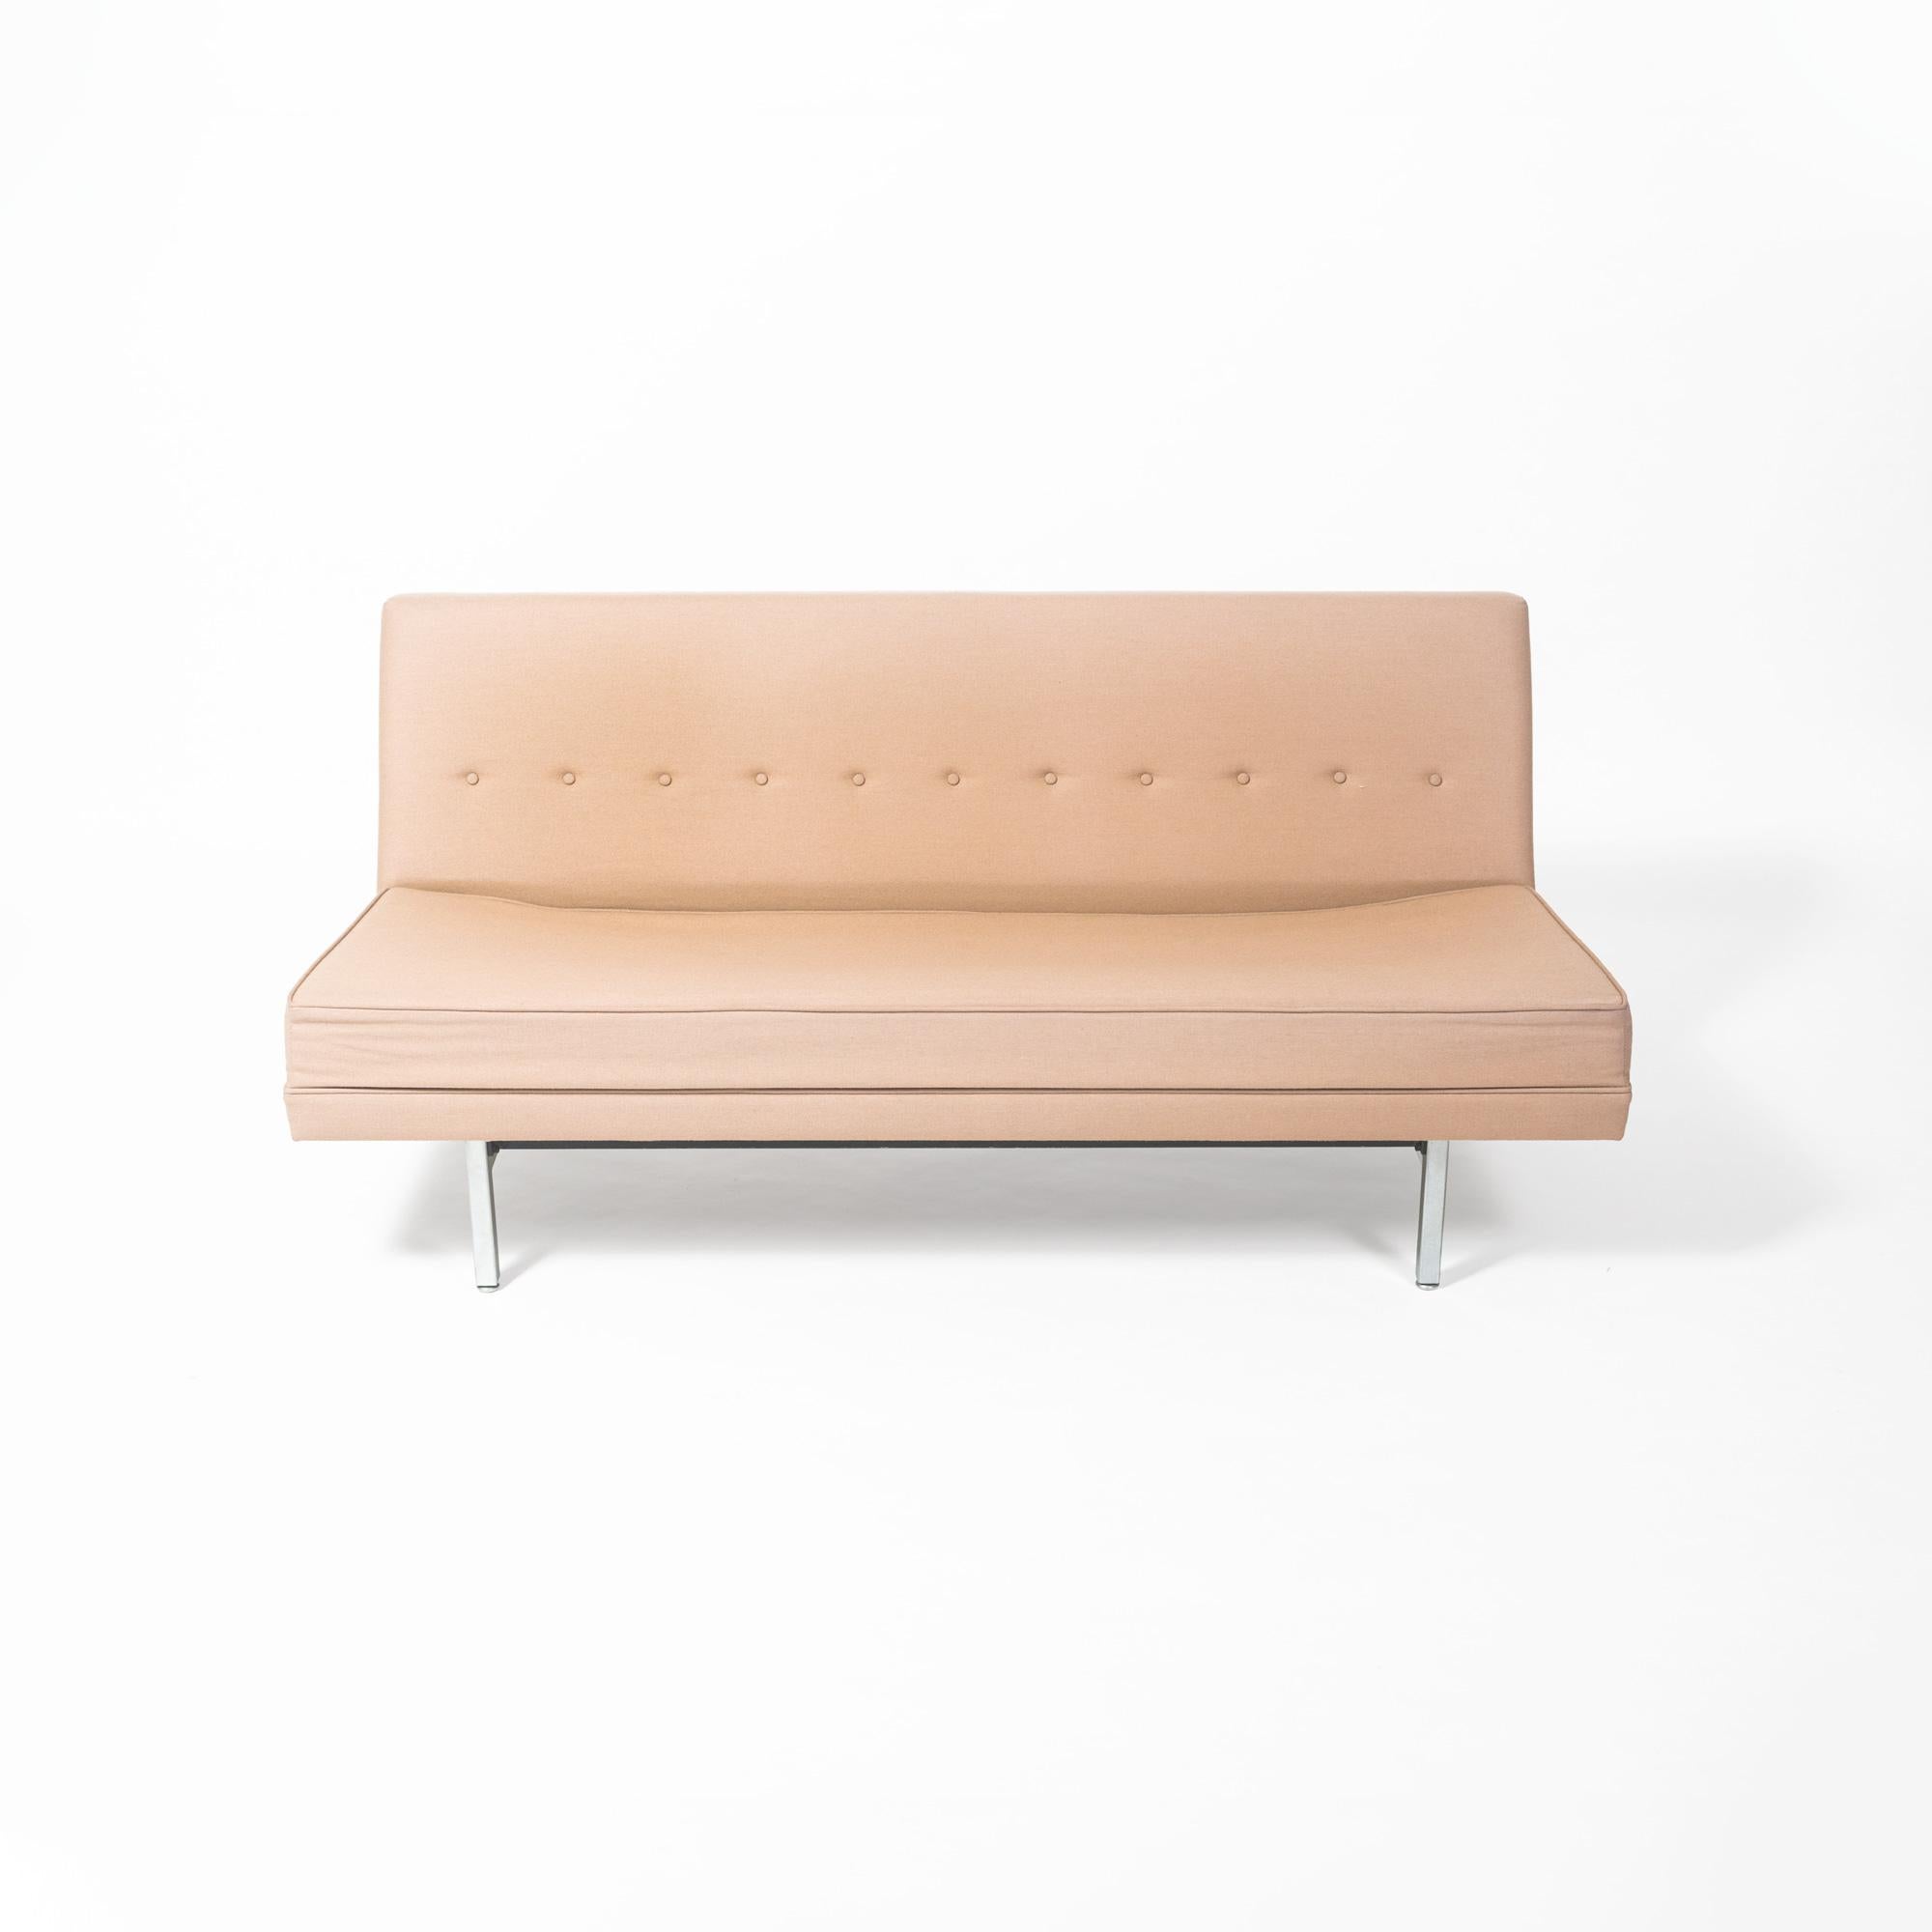 Pair of early George Nelson for Herman Miller sofa in original blush pink colored fabric upholstery and metal and wood frame. Early Herman Miller Label present underneath the sofa frame with chrome plated legs. This is an extremely rare George